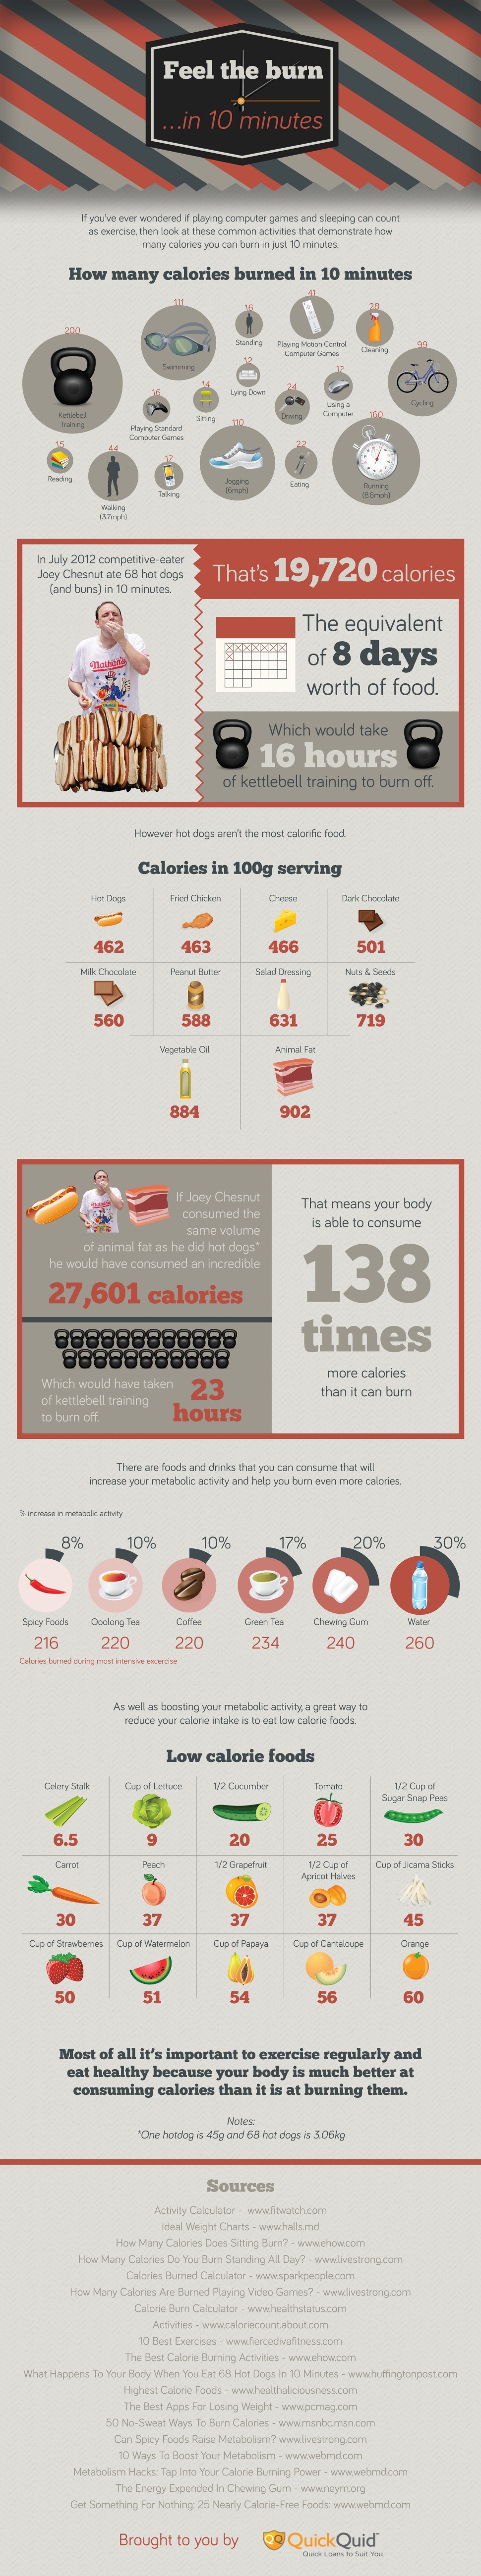 calories to burn in 10 minutes